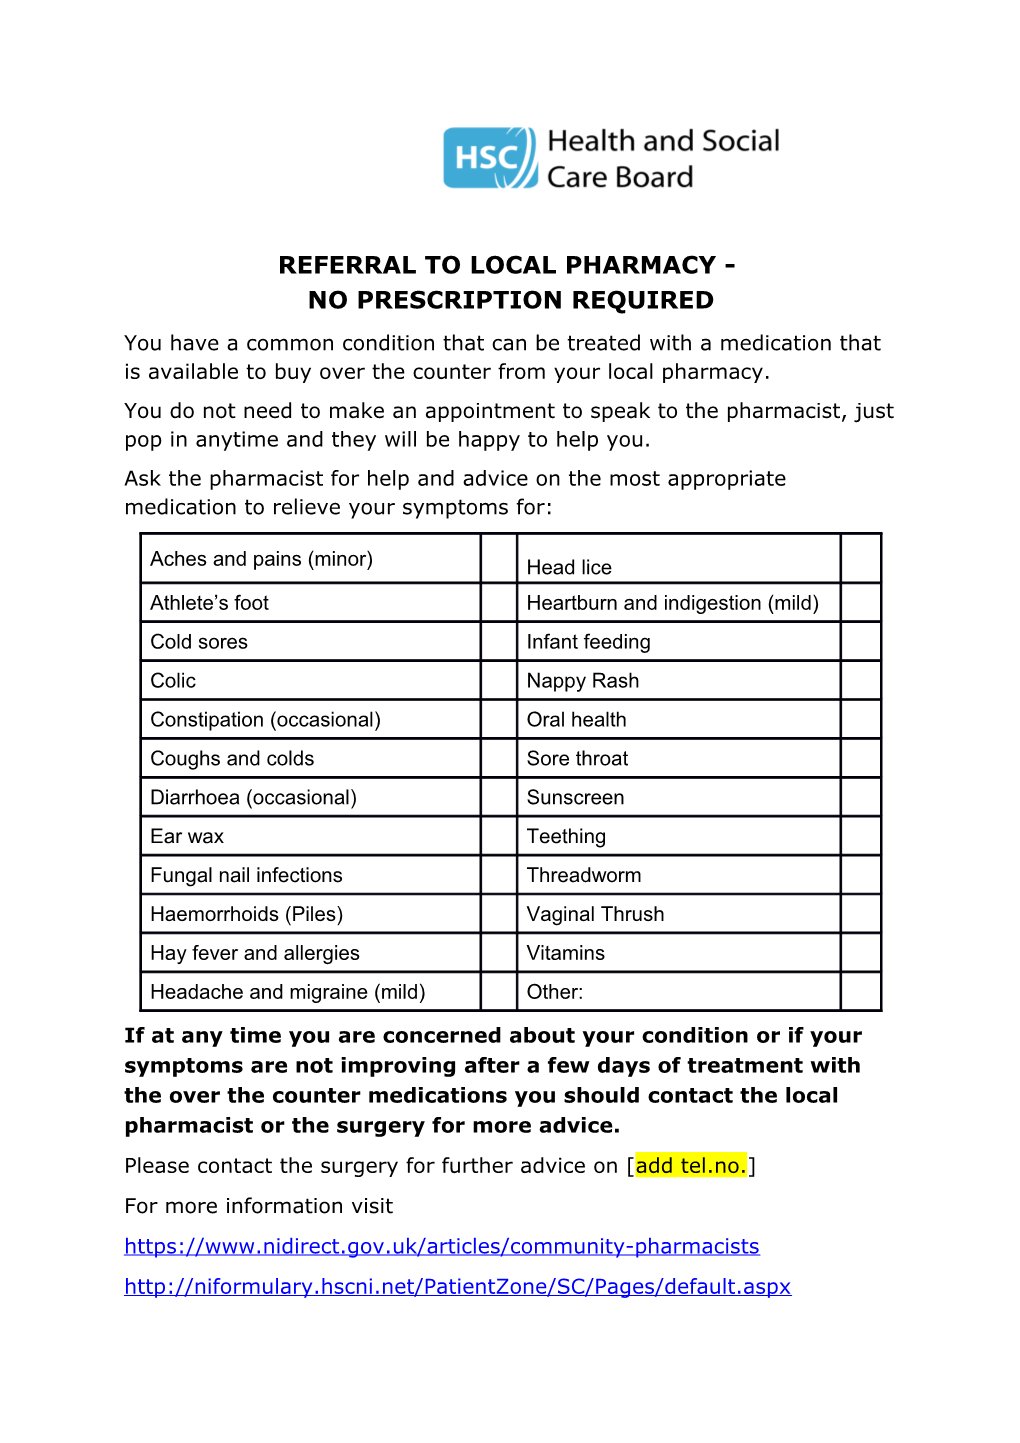 Referral to Local Pharmacy - No Prescription Required